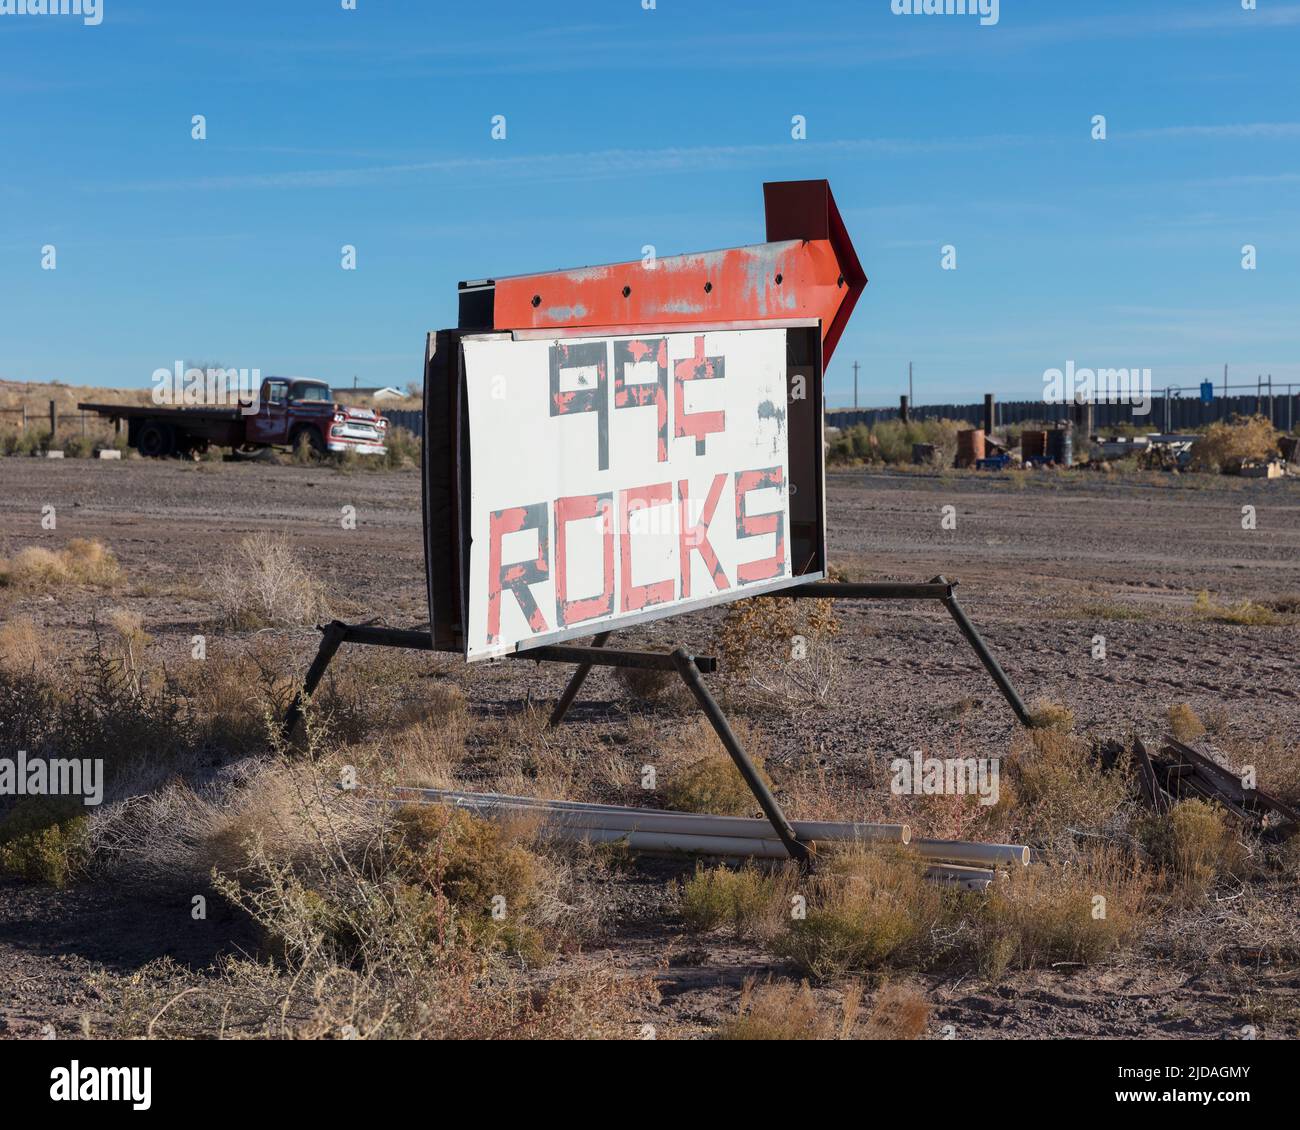 Rusty roadside sign advertising a reststop, deserted trucks and rubbish. Stock Photo